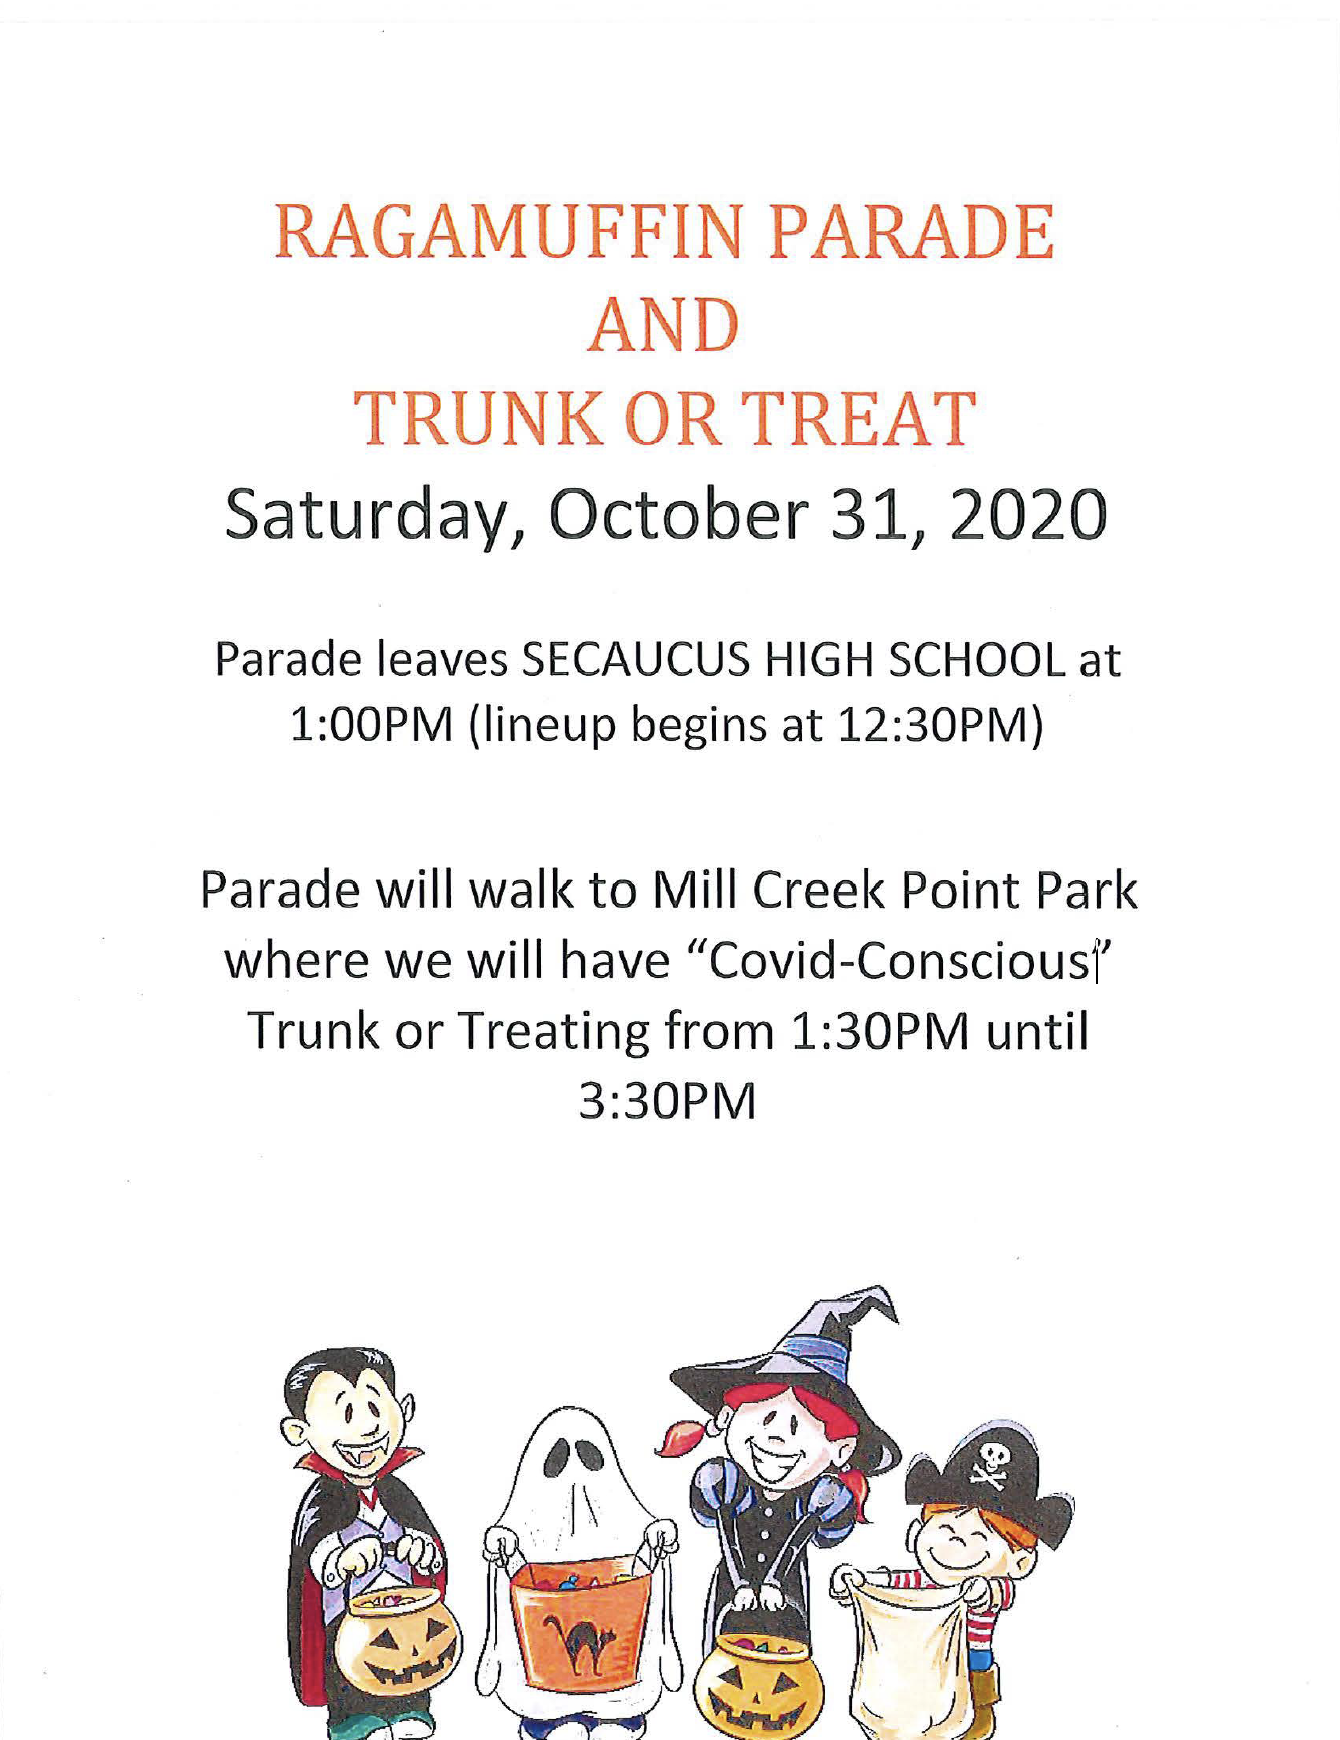 Ragamuffin Parade and Trunk or Treat Flyer